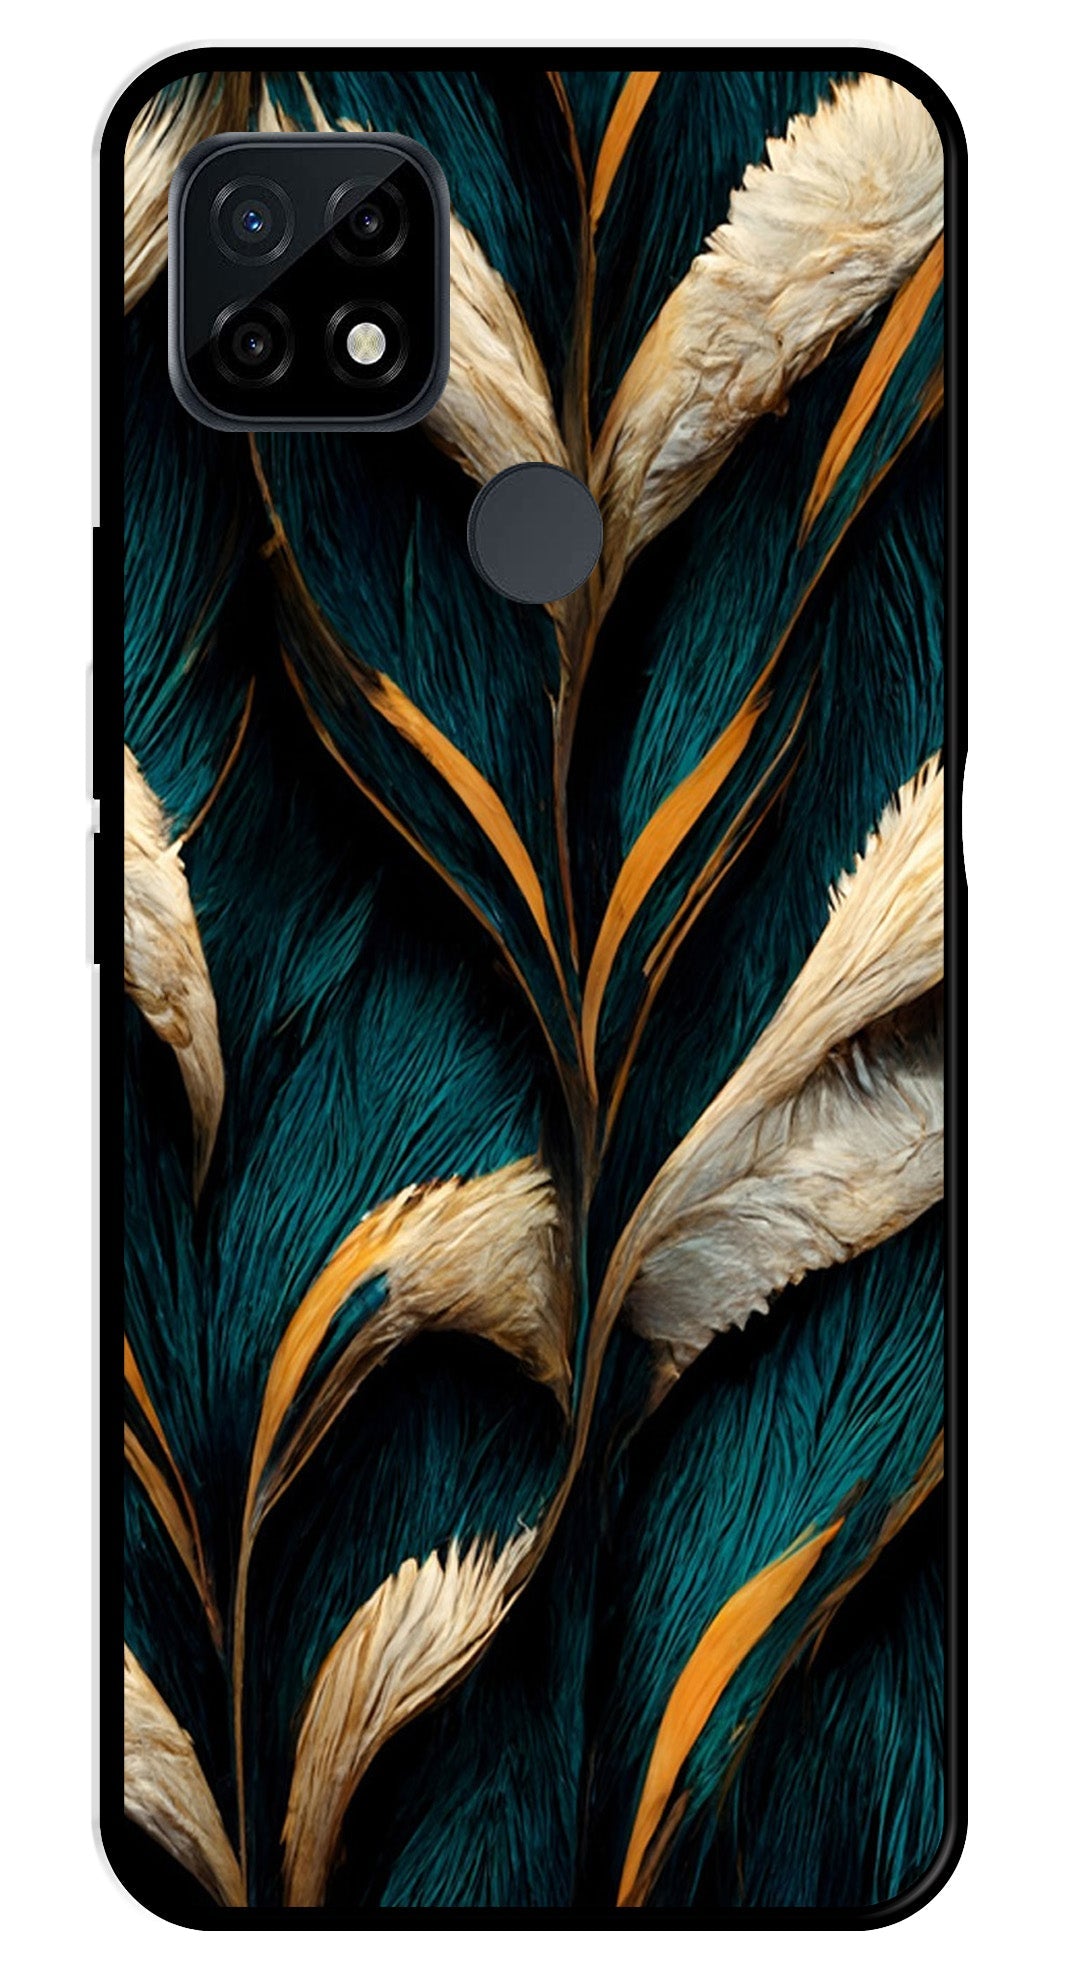 Feathers Metal Mobile Case for Realme C21   (Design No -30)